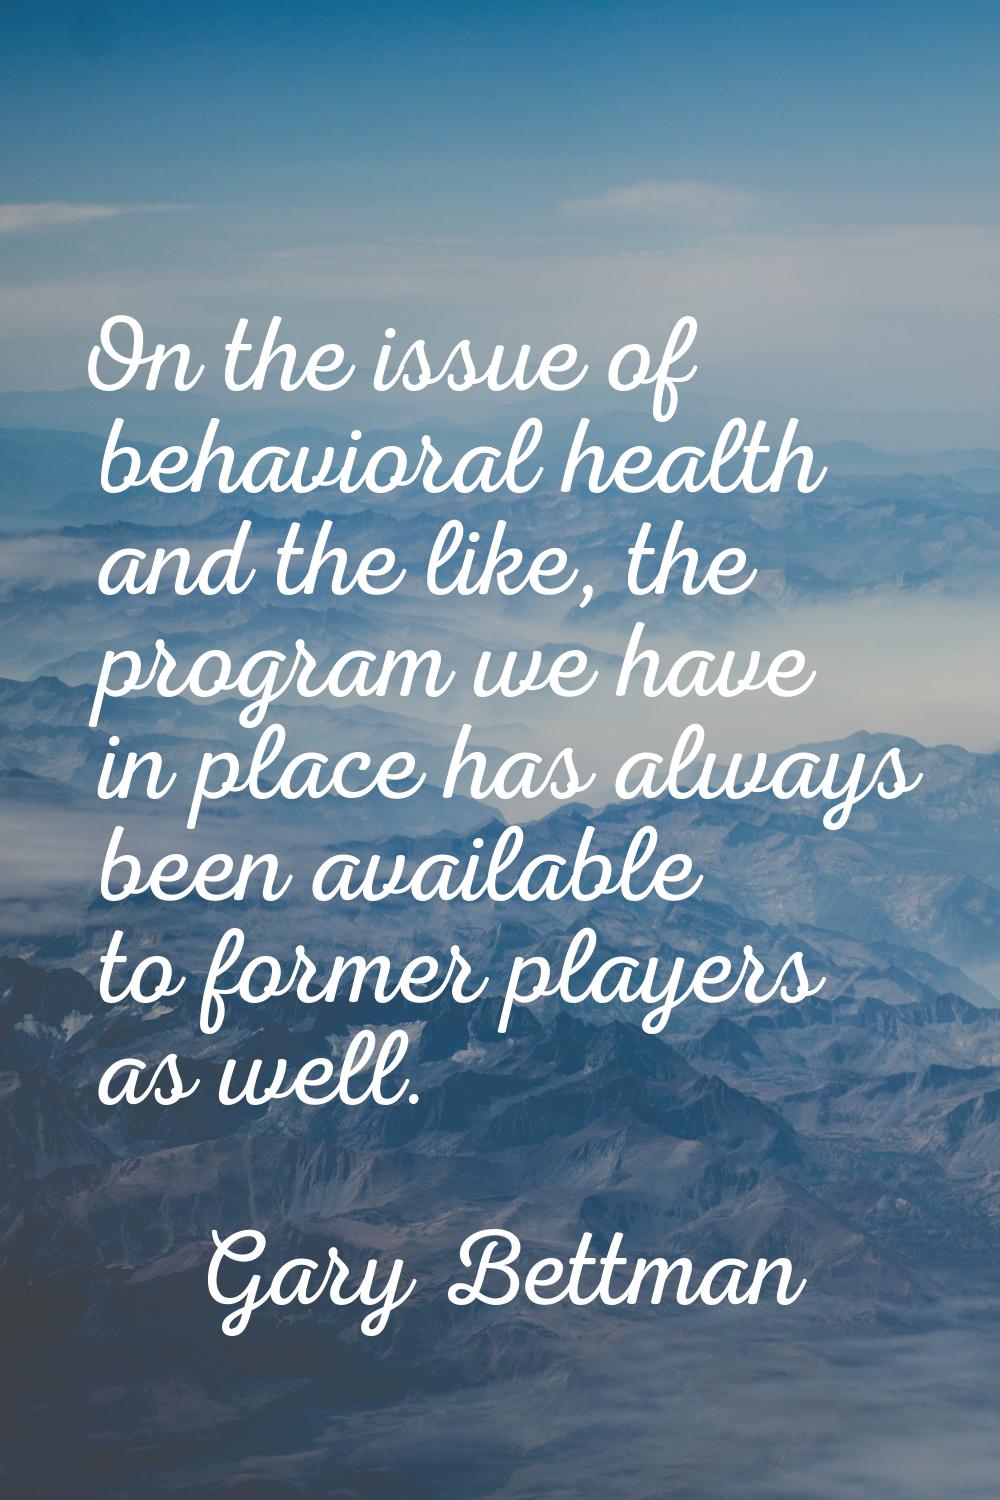 On the issue of behavioral health and the like, the program we have in place has always been availa